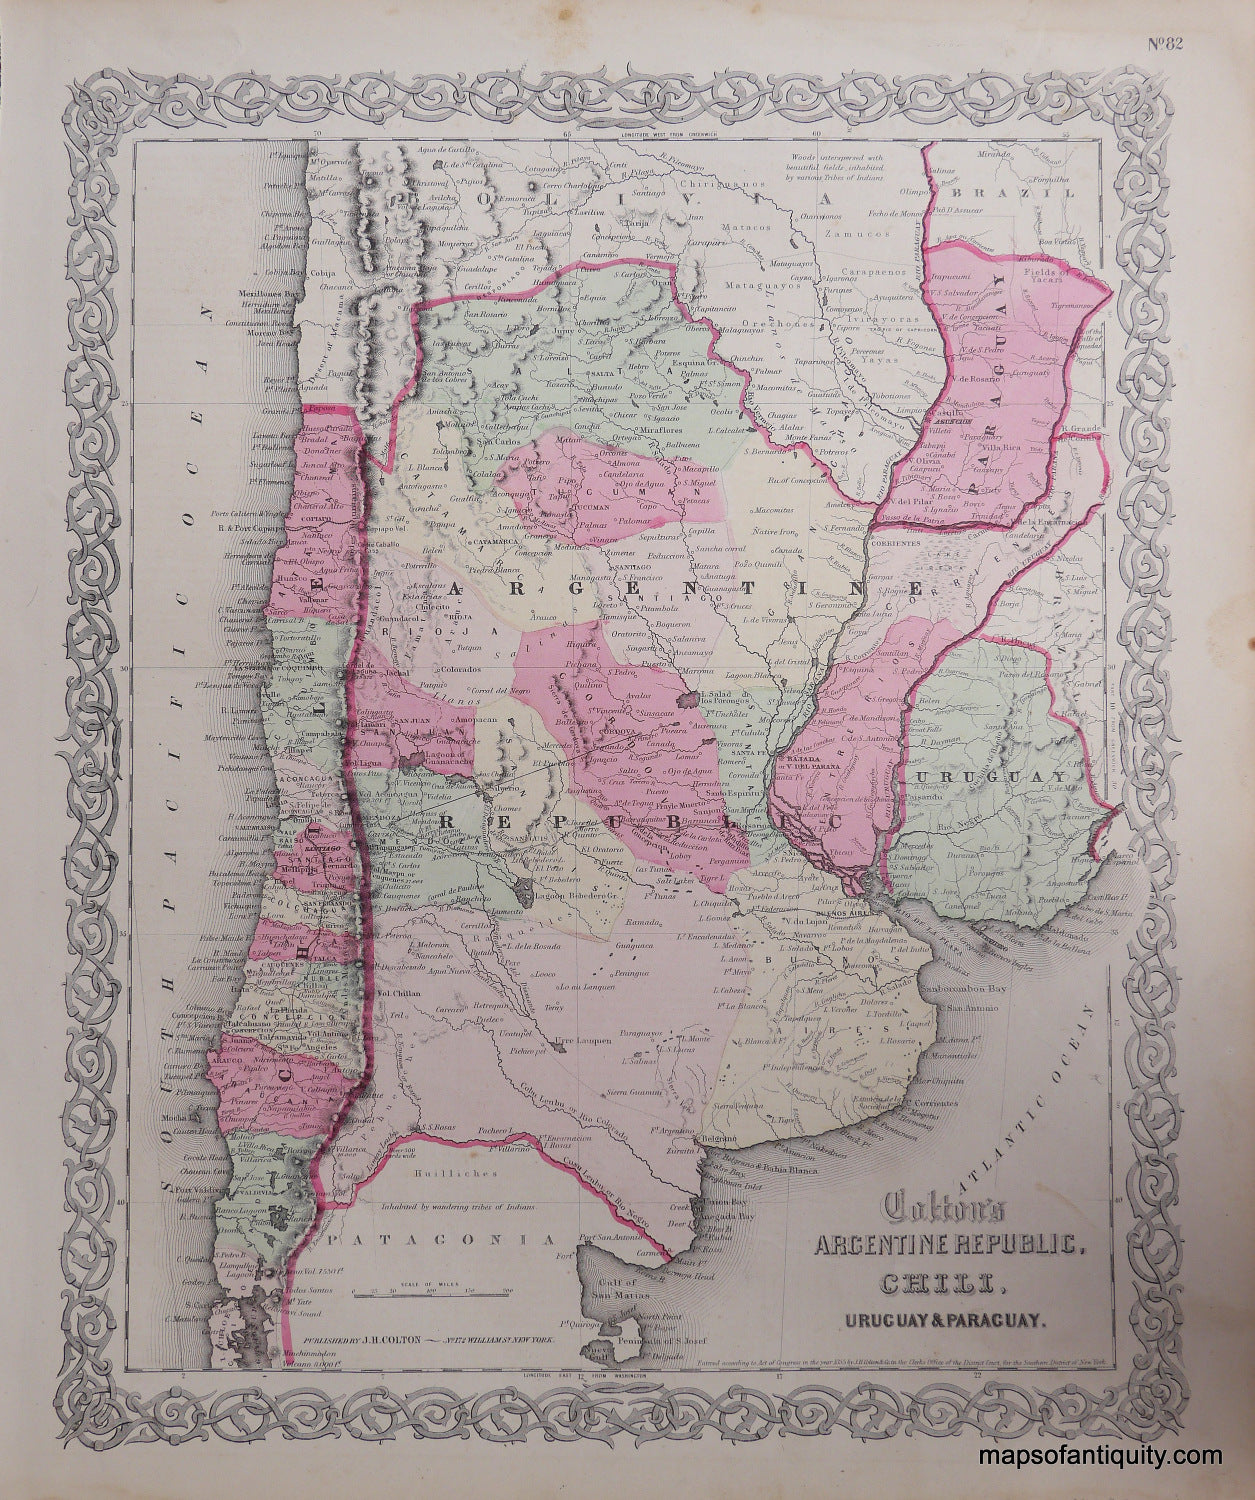 Antique-Hand-Colored-Map-Colton's-Argentine-Republic-Chile-Uruguay-and-Paraguay-South-America--1865-Colton-Maps-Of-Antiquity